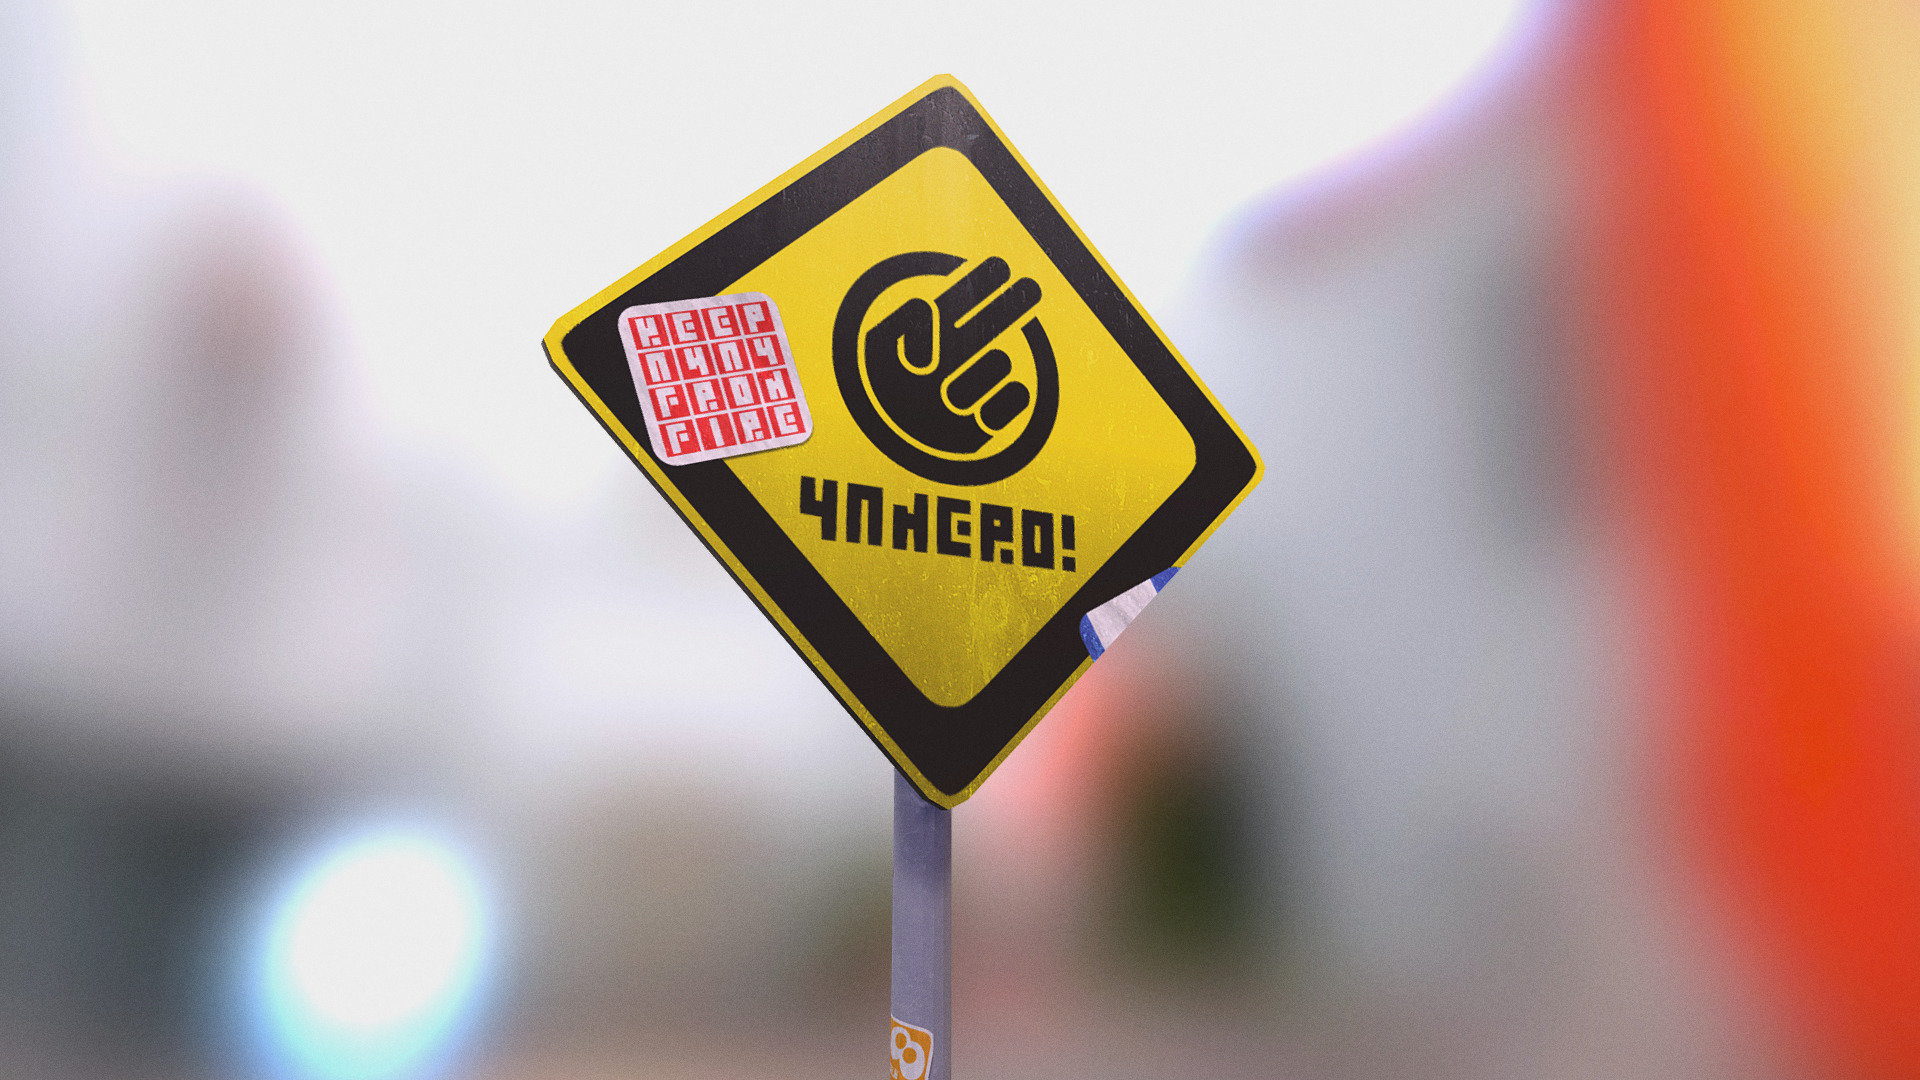 This is me trying to get back into 3D-modelling. I was trying to work around with Substance Painter, but it didn't quite work out, so back to Photoshop I went! 

All artwork, including the stickers, are my work - Road Sign - 3D model by Tobias (@misterfox) 3d model